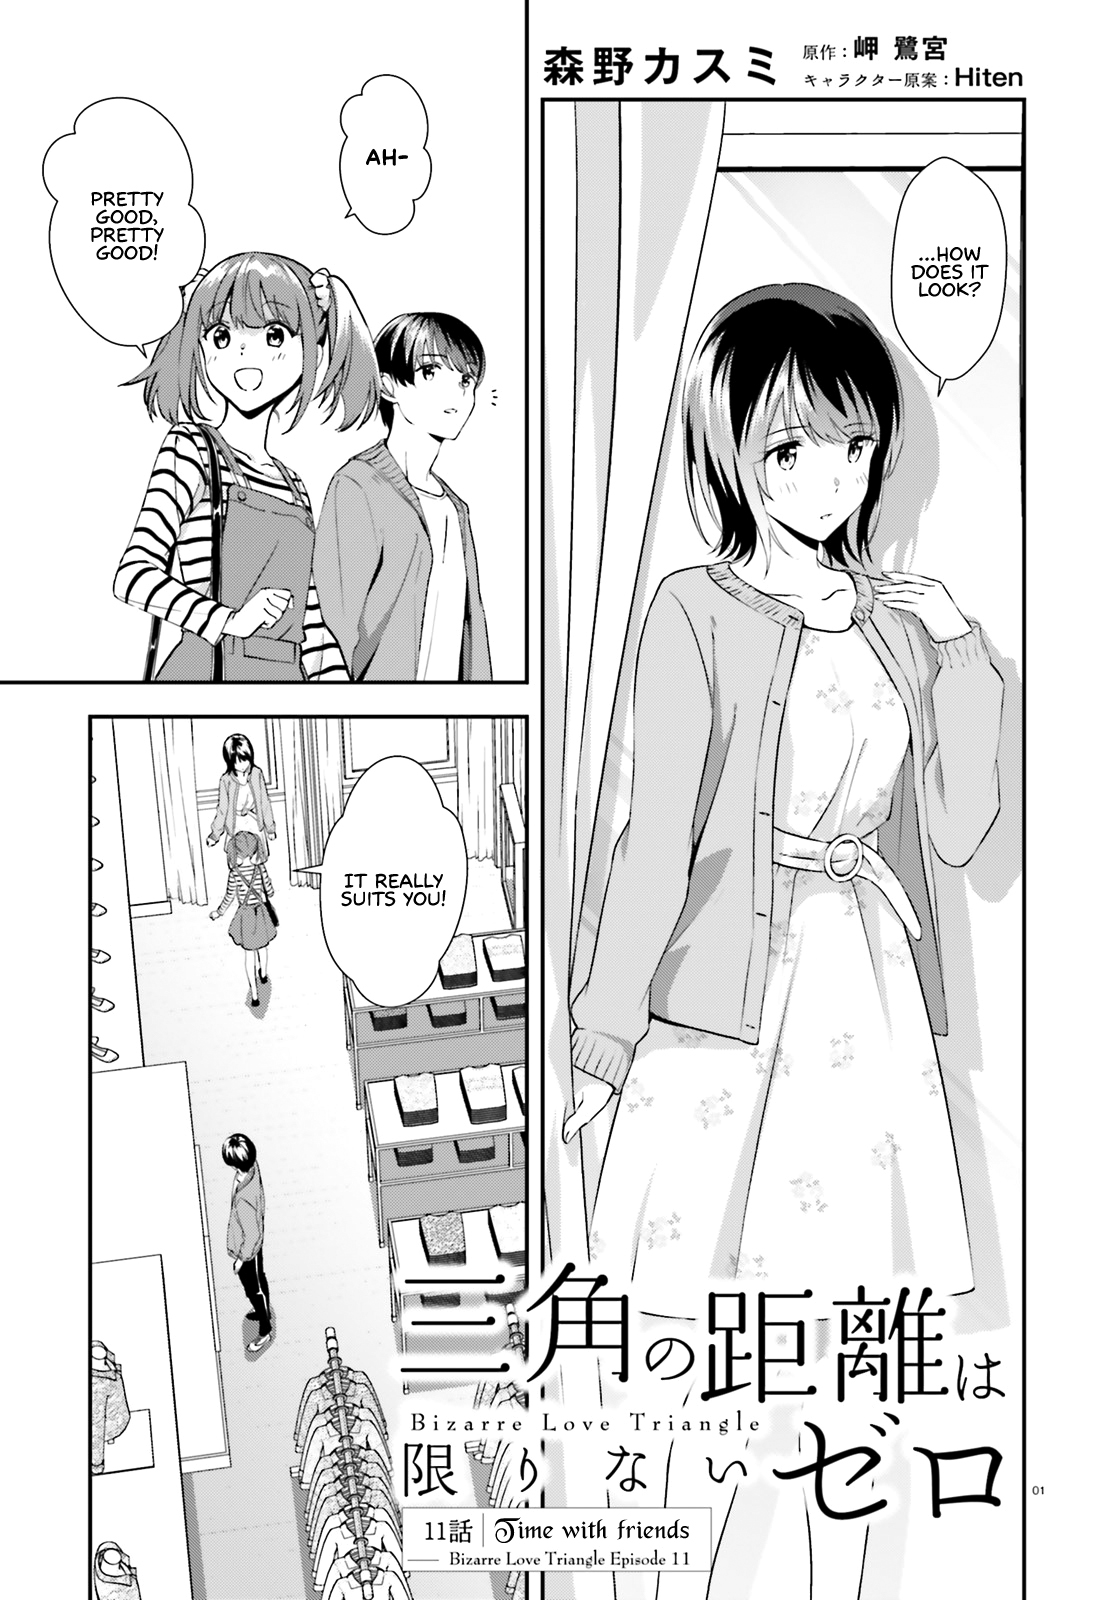 Bizarre Love Triangle Vol.2 Chapter 11: Time With Friends - Picture 2